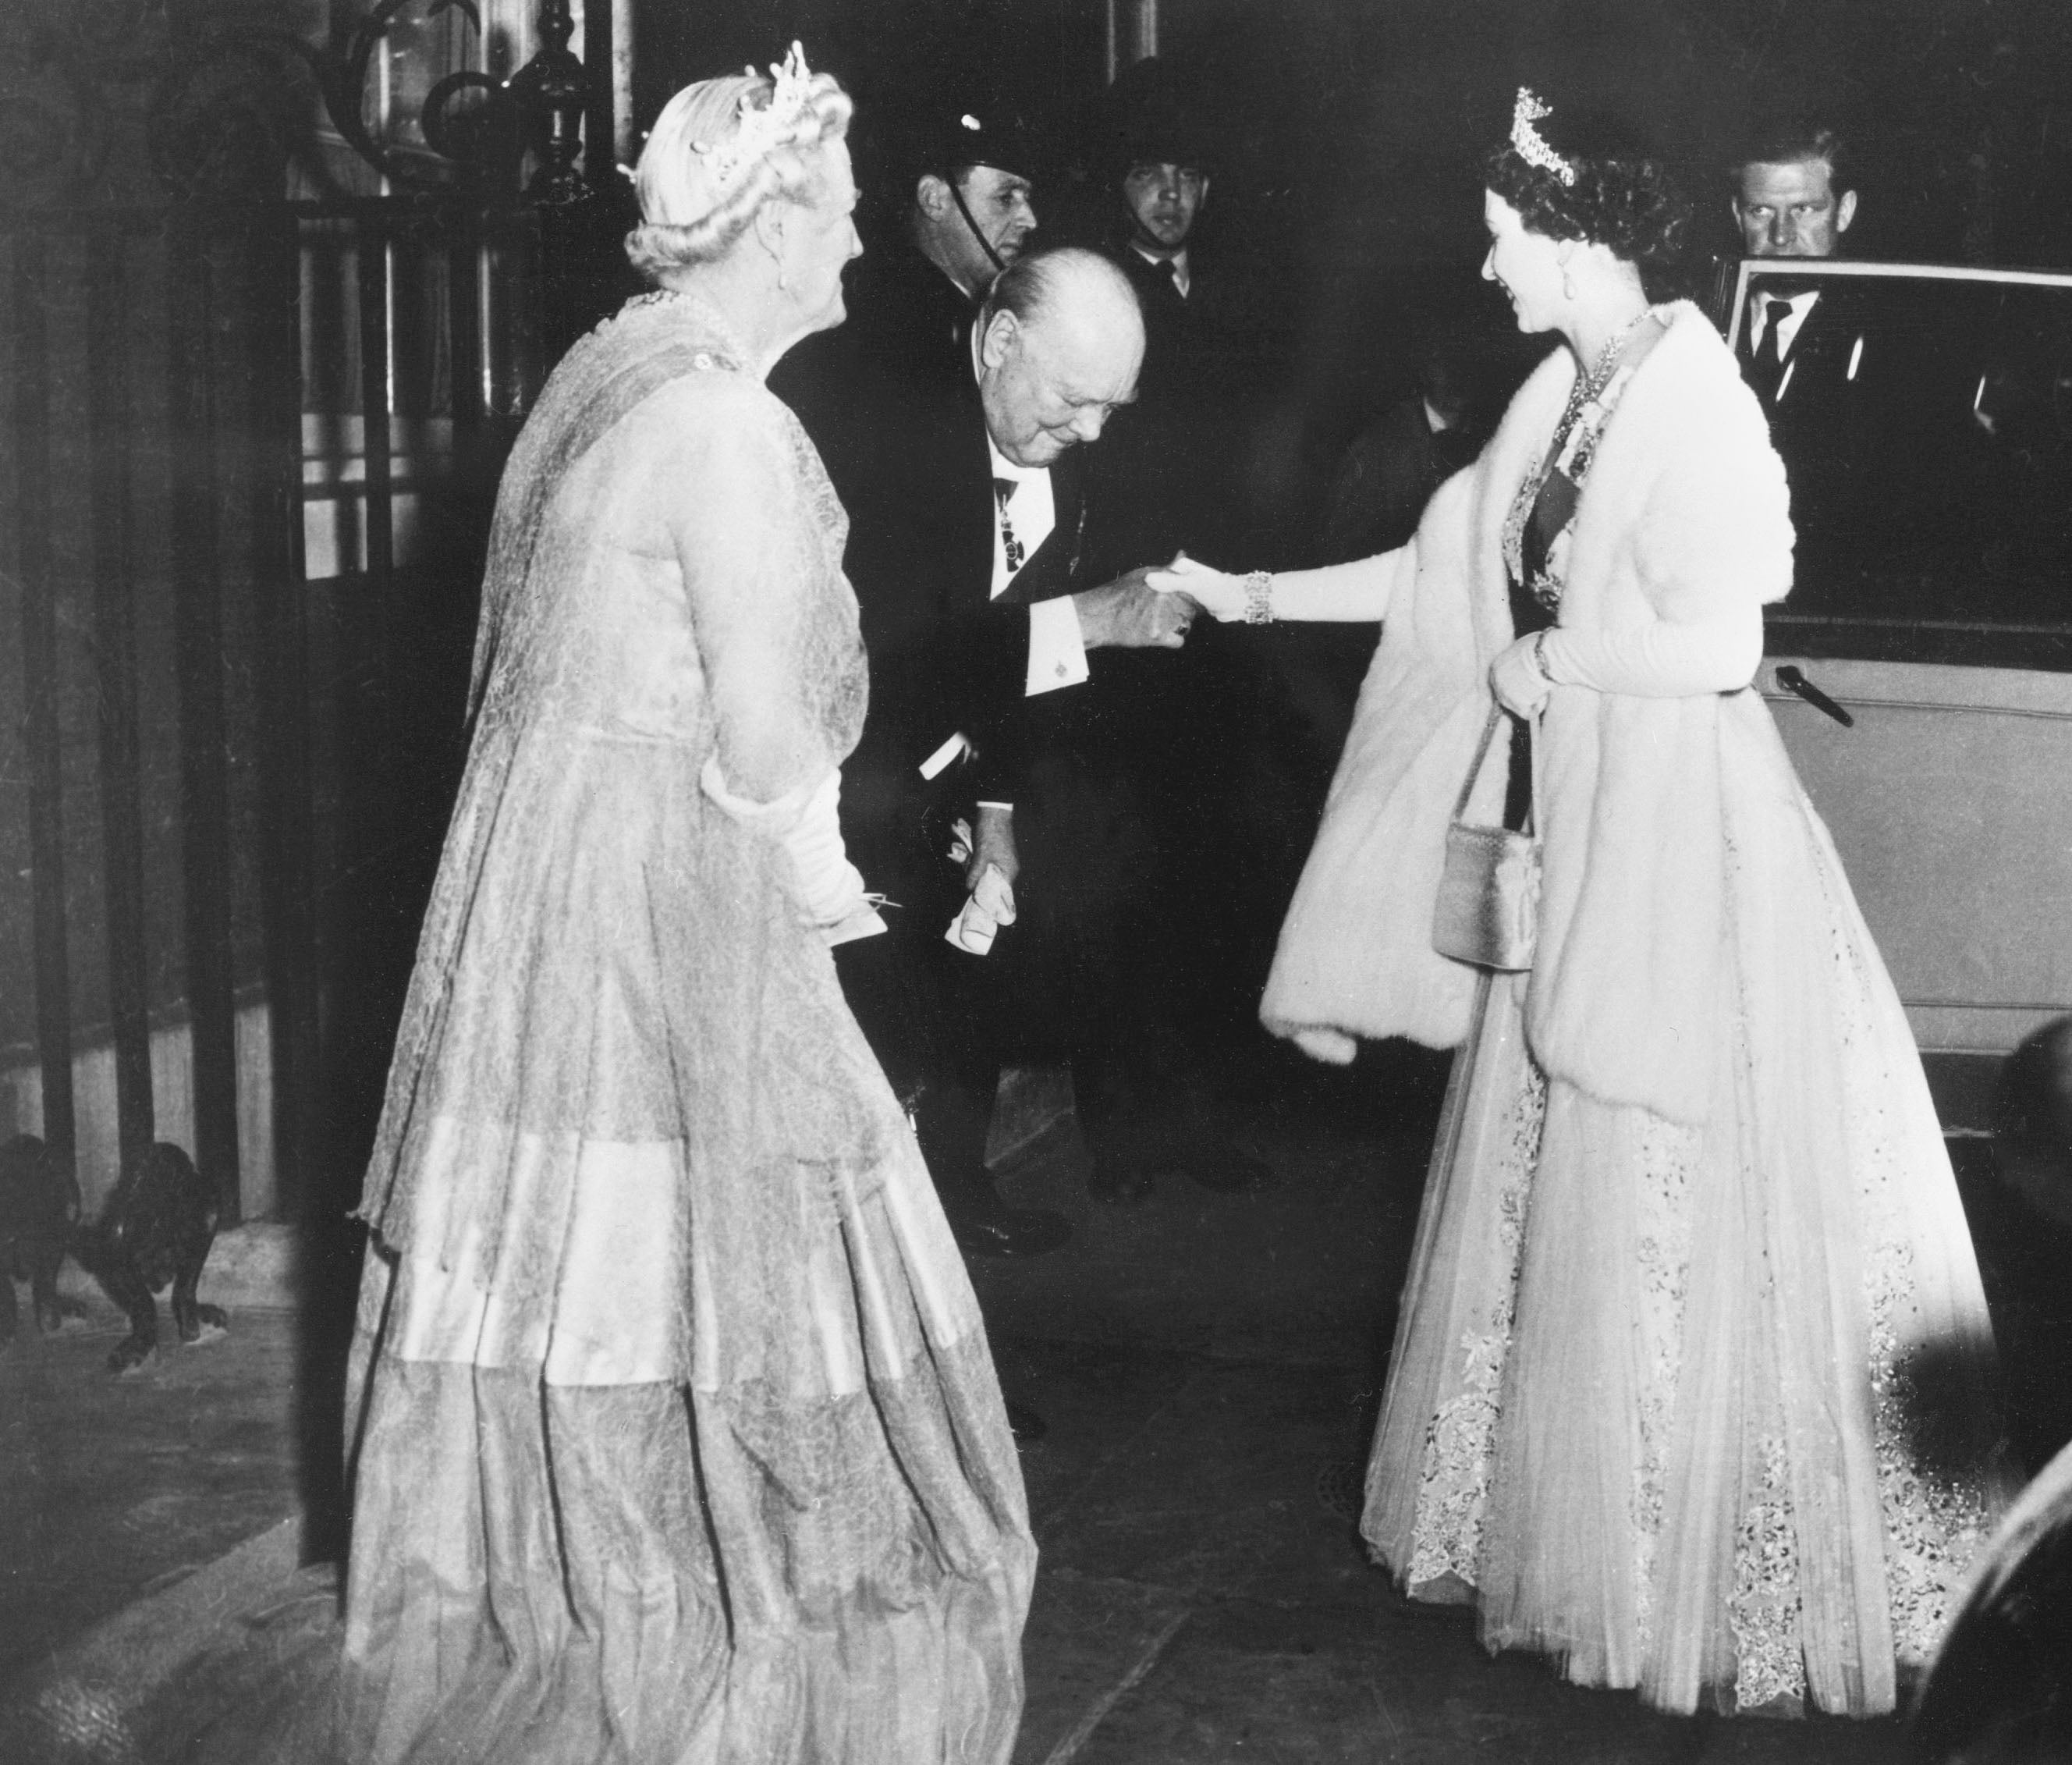 Prime minister Winston Churchill kisses Queen Elizabeth II’s hand as she leaves No 10 after a dinner given by the PM on 4 April 1955. Churchill was the first PM the Queen worked with during her reign